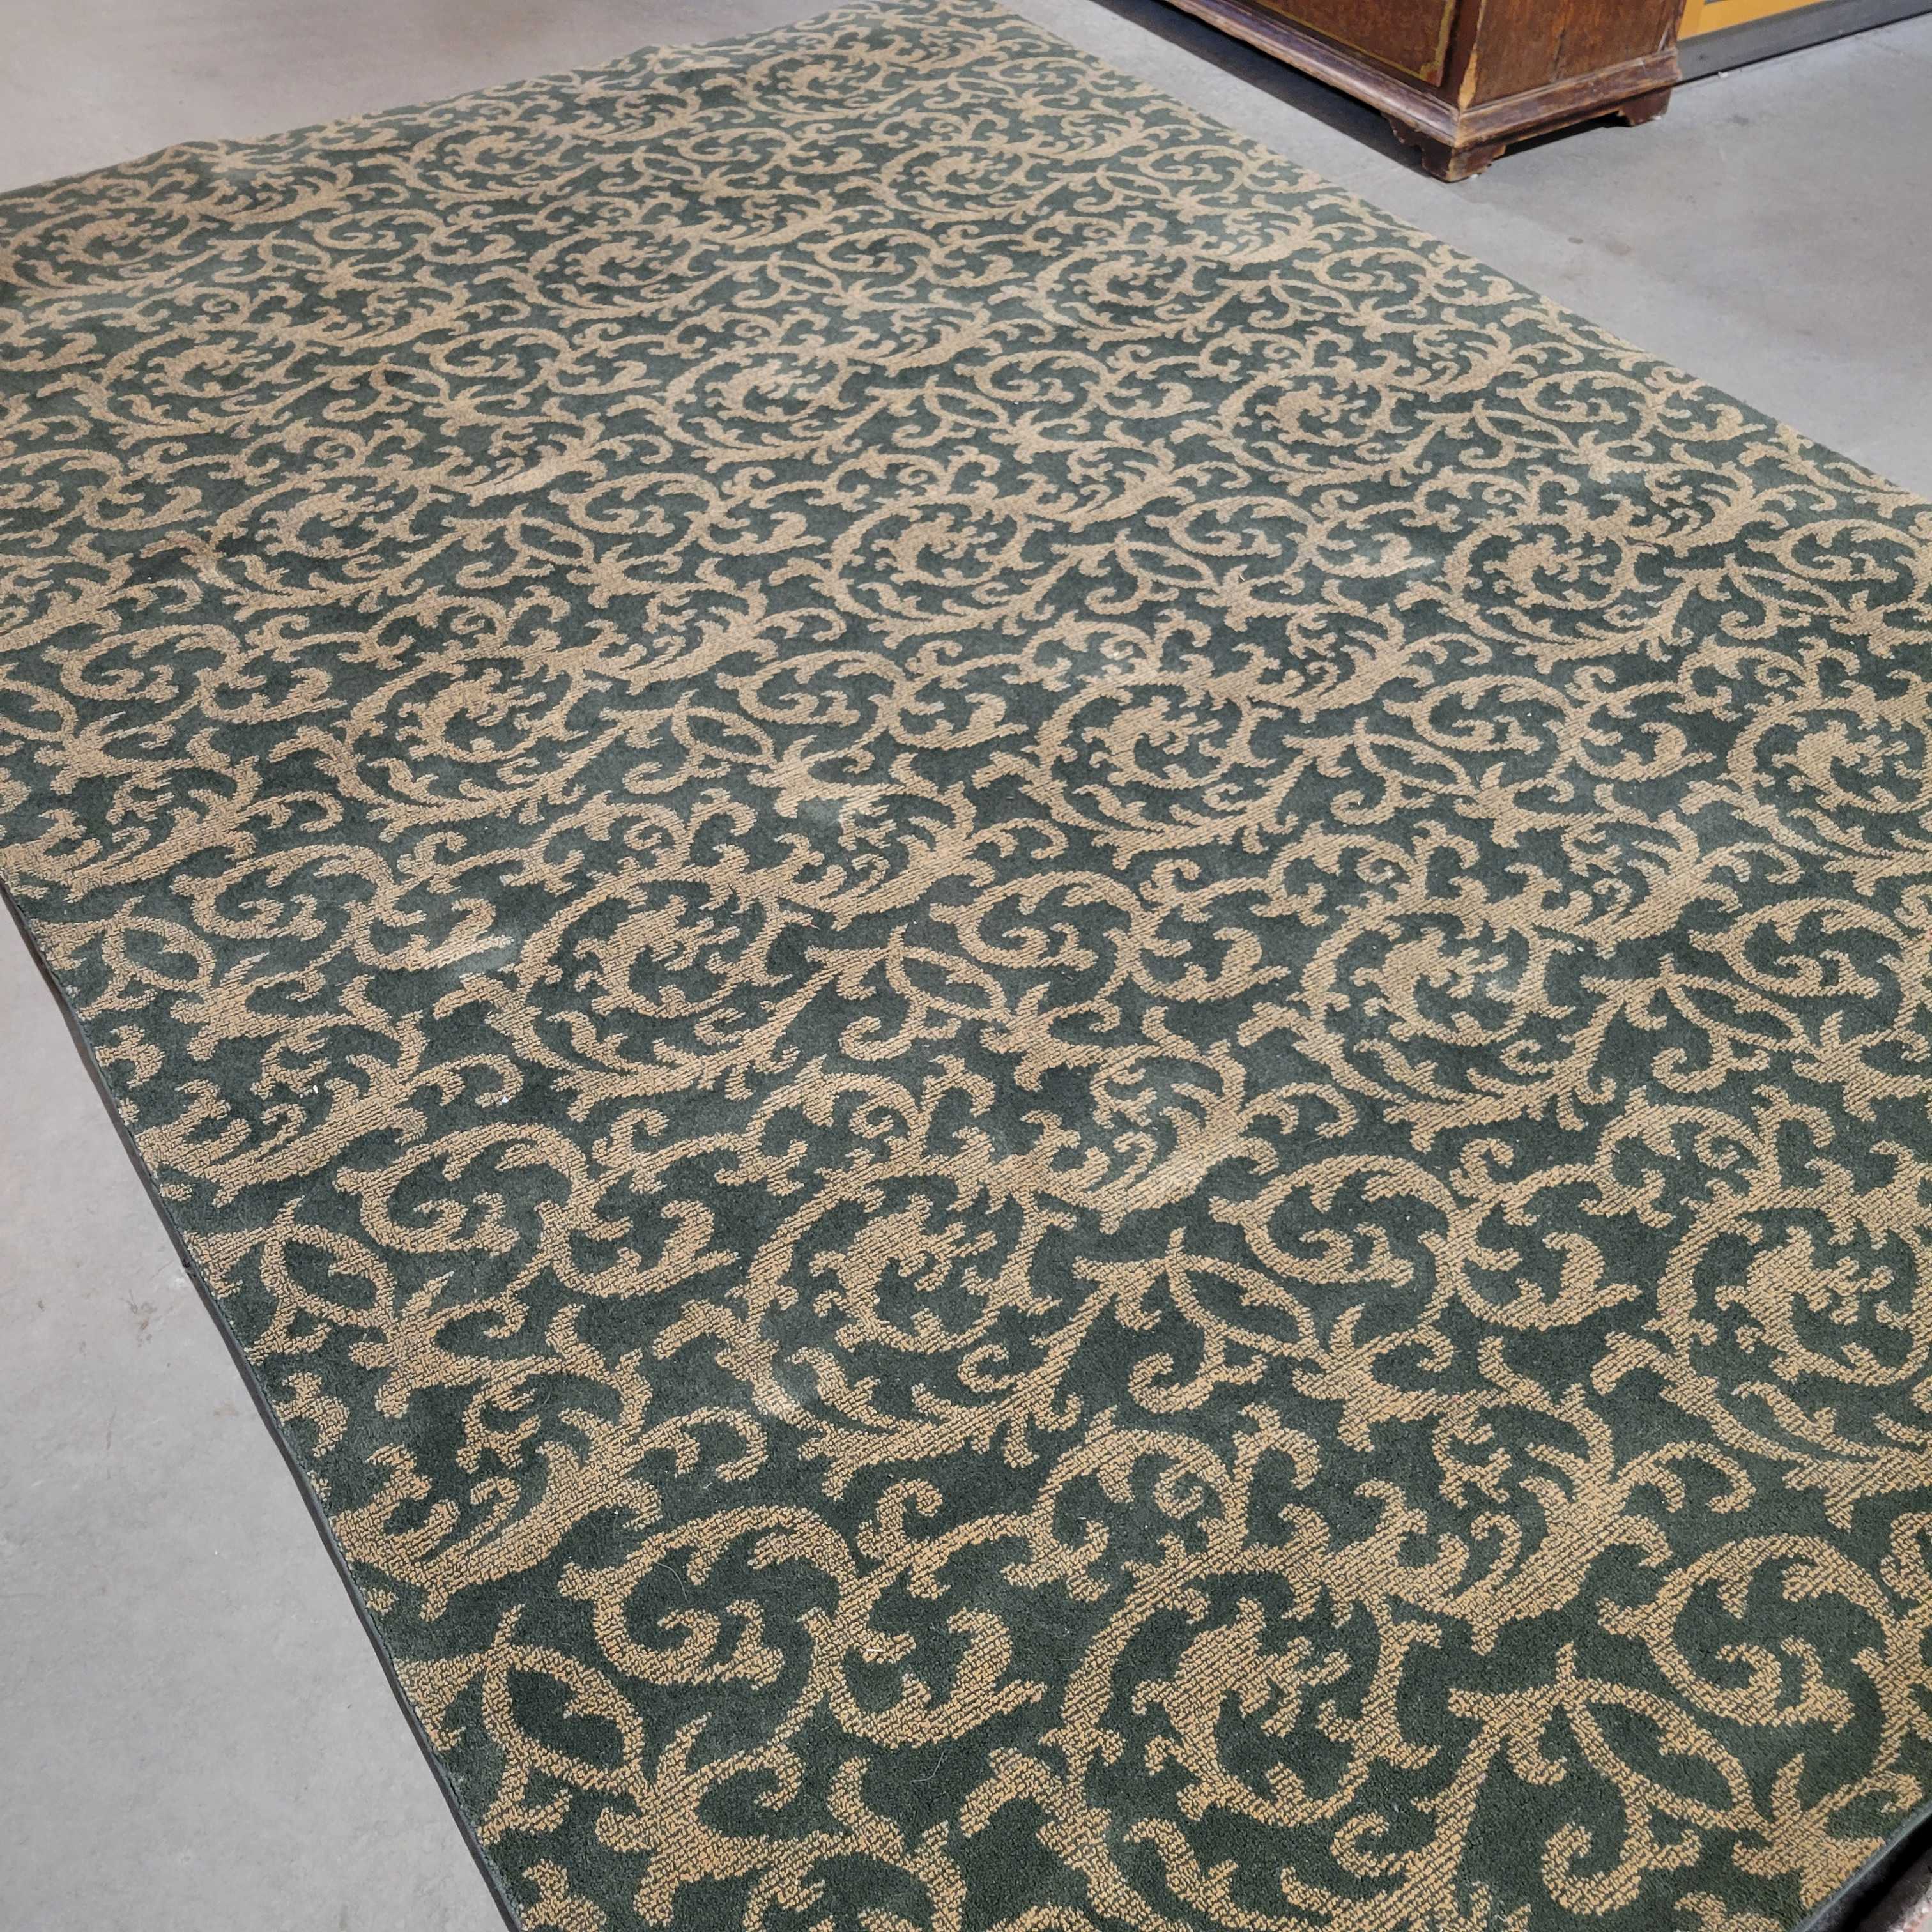 7'6"x 11' Green and Gold Scroll Leaf Few Stains with Pad Rug